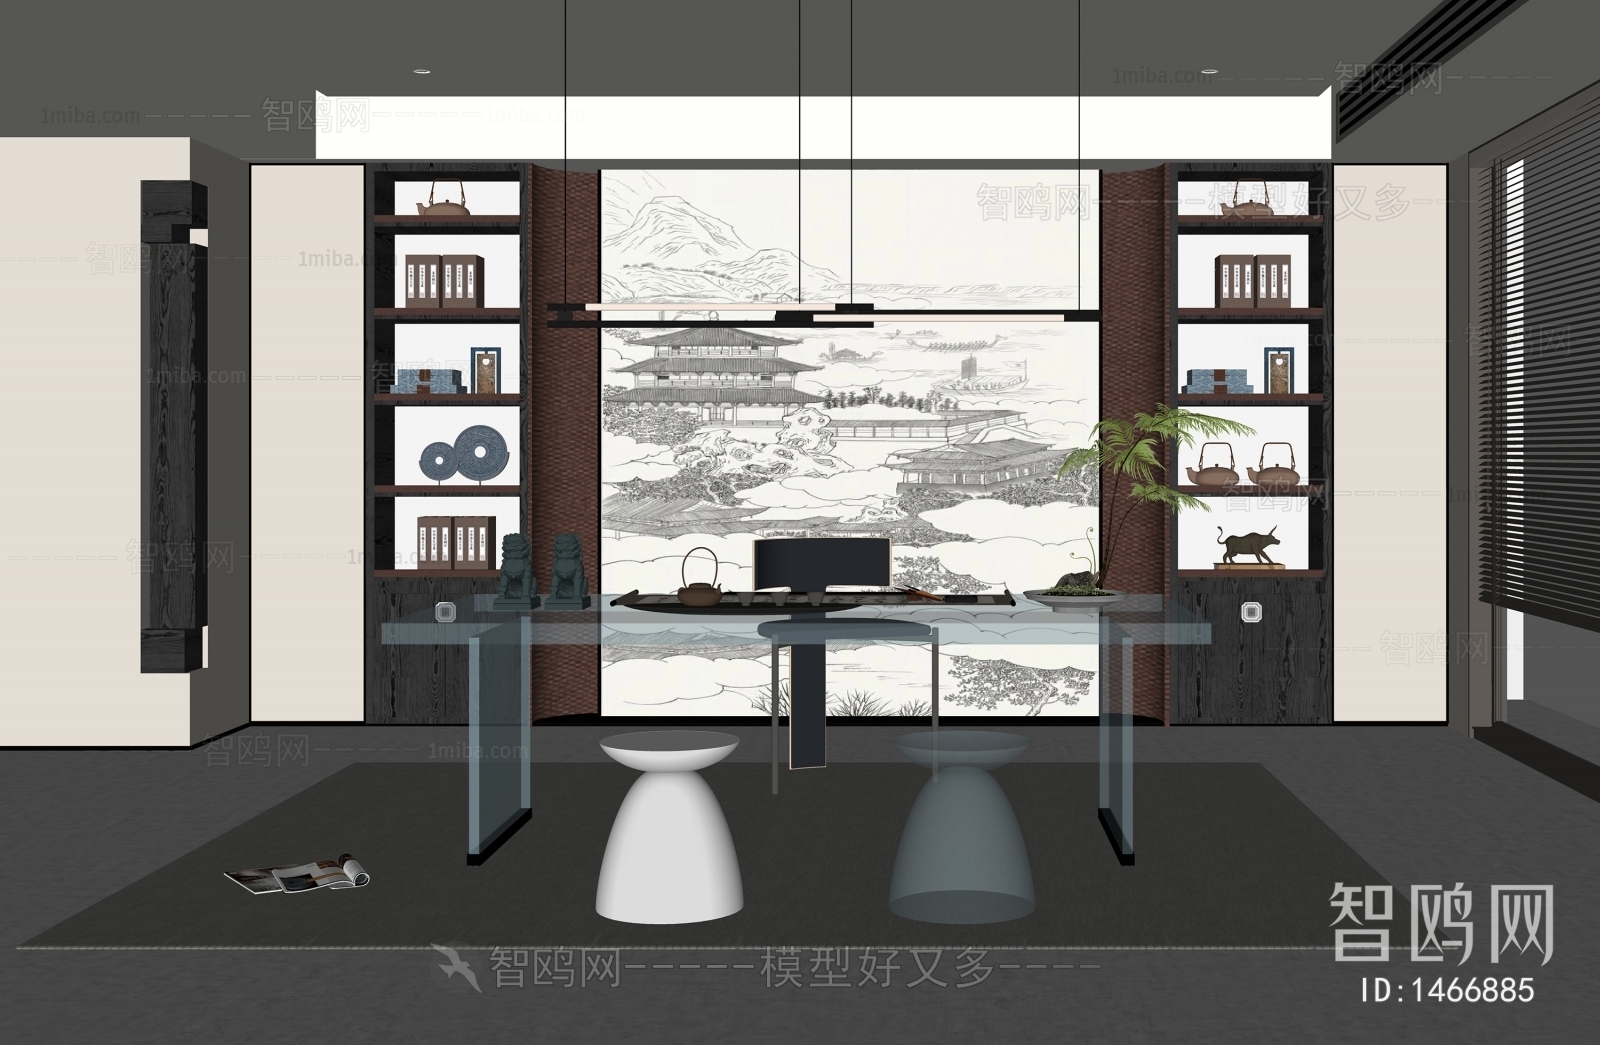 New Chinese Style Study Space